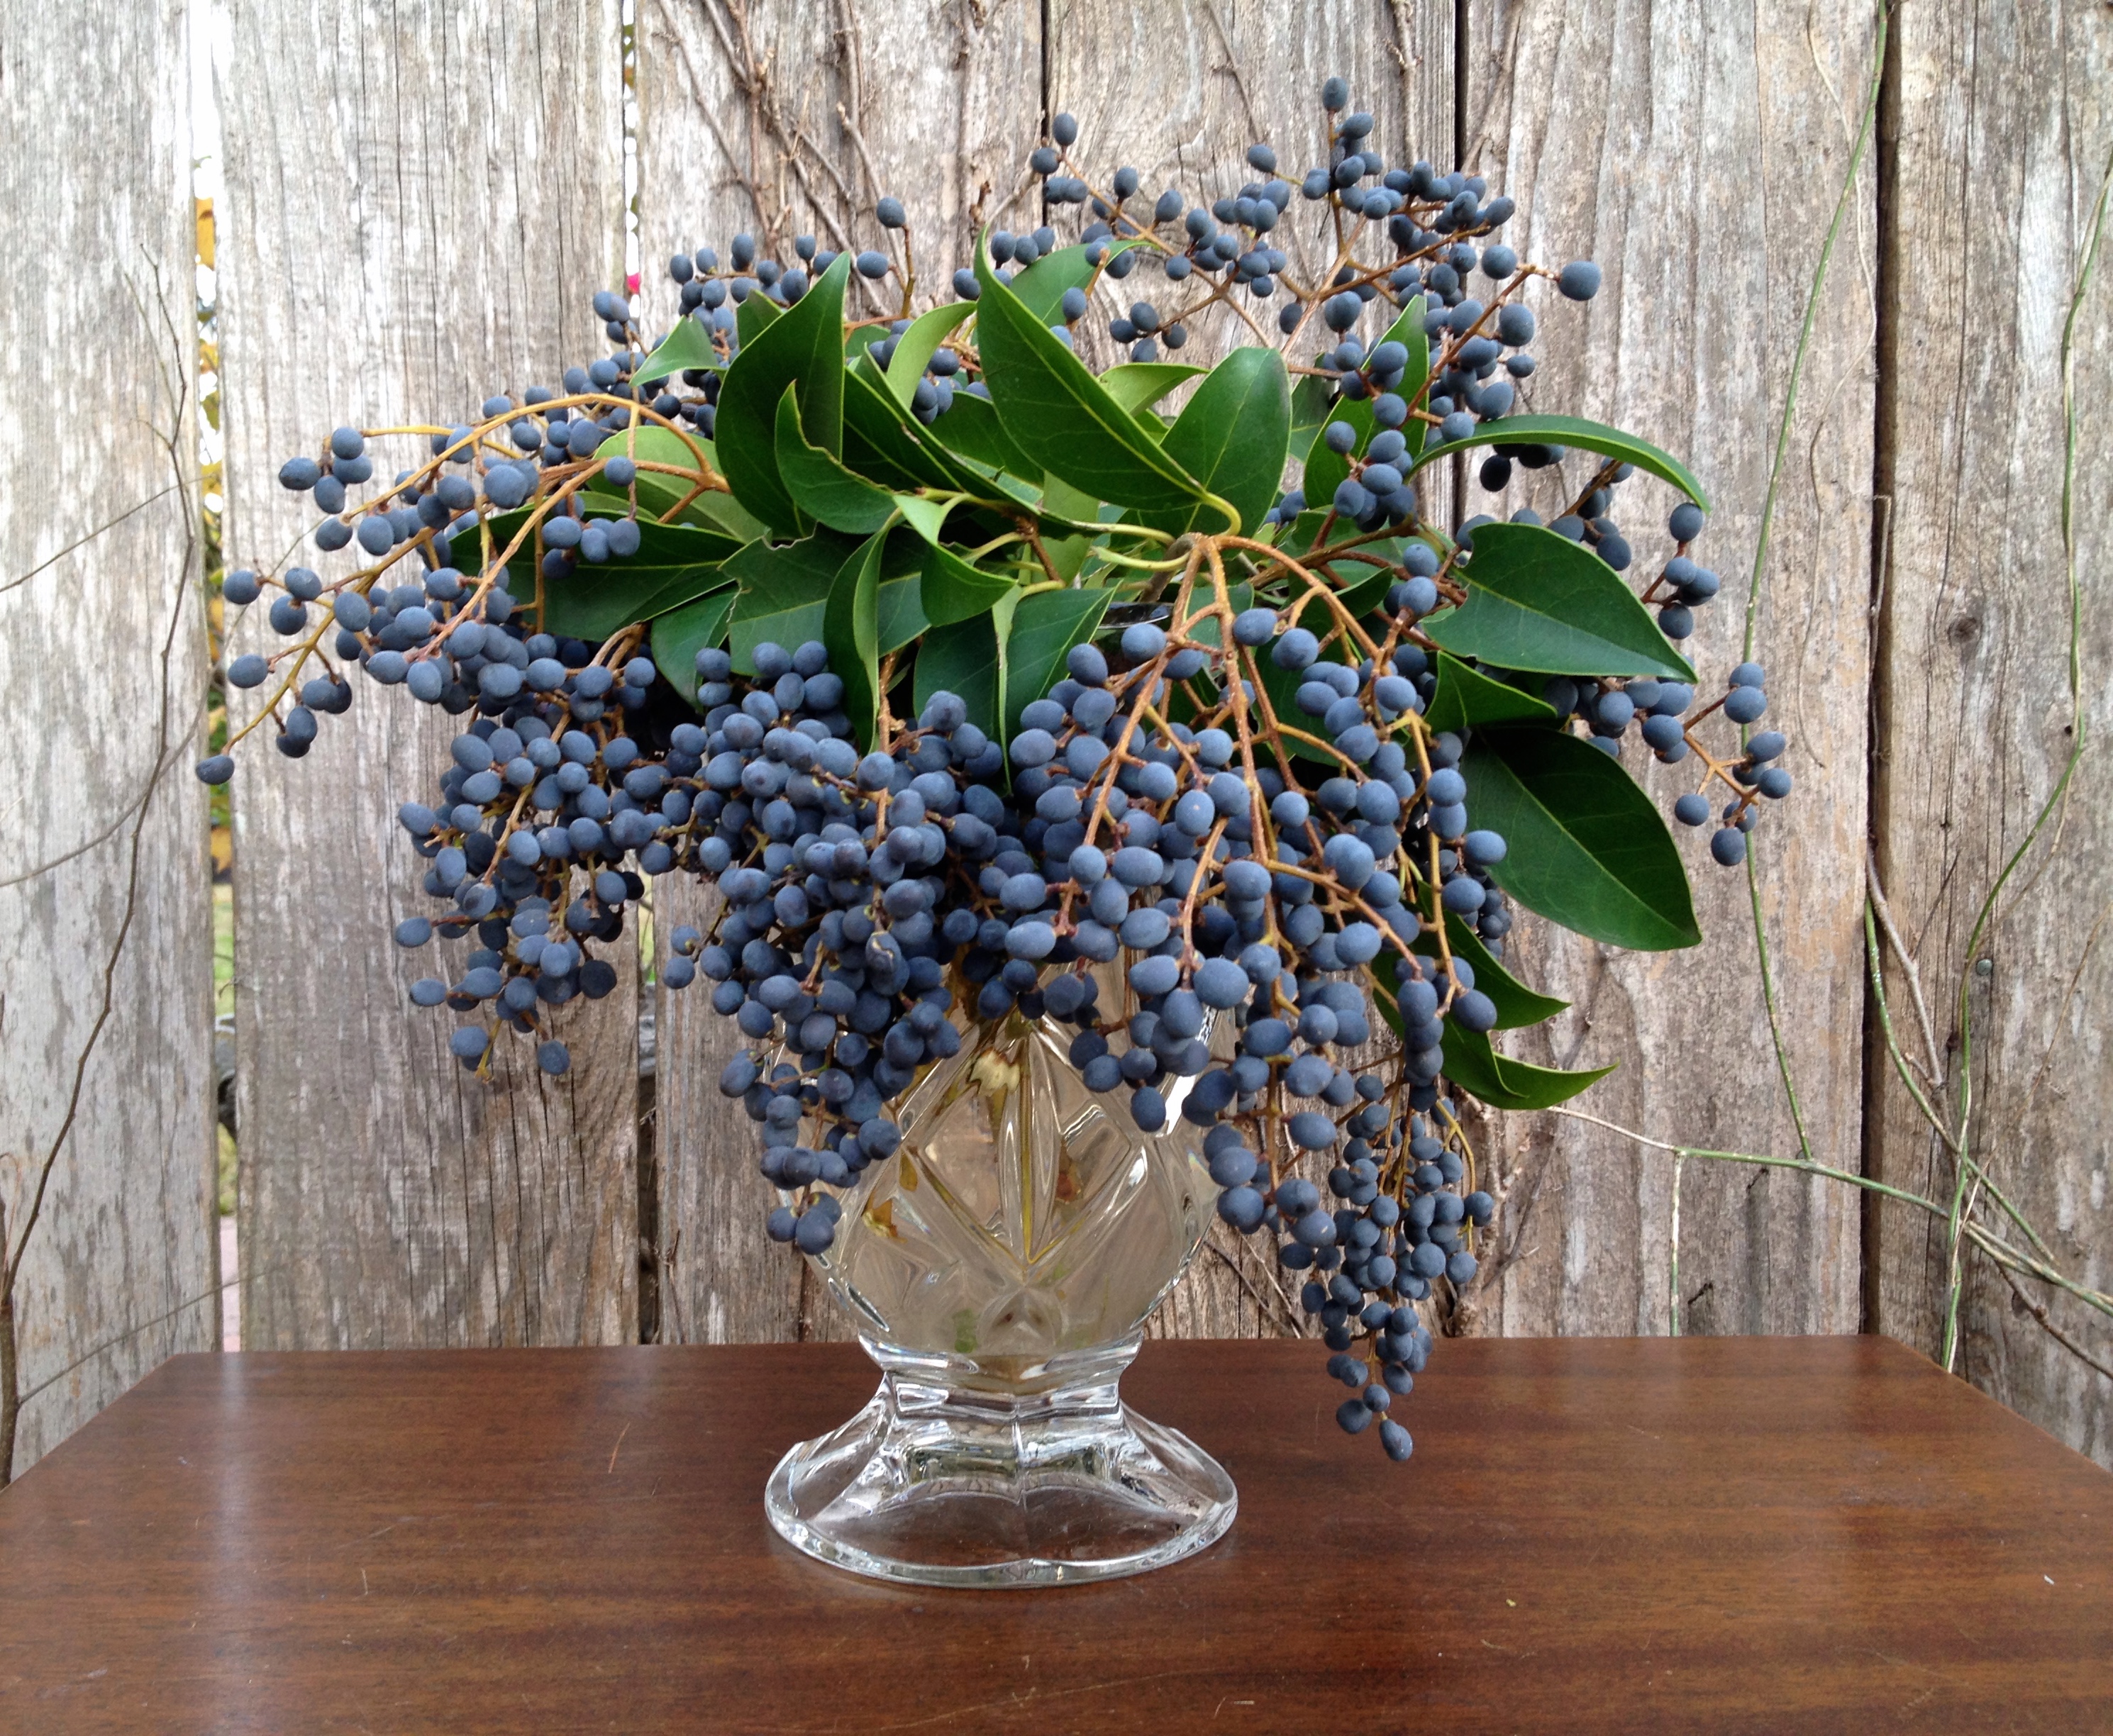 How to use Garden Berries in your Floral Arrangements | Flowers for ...